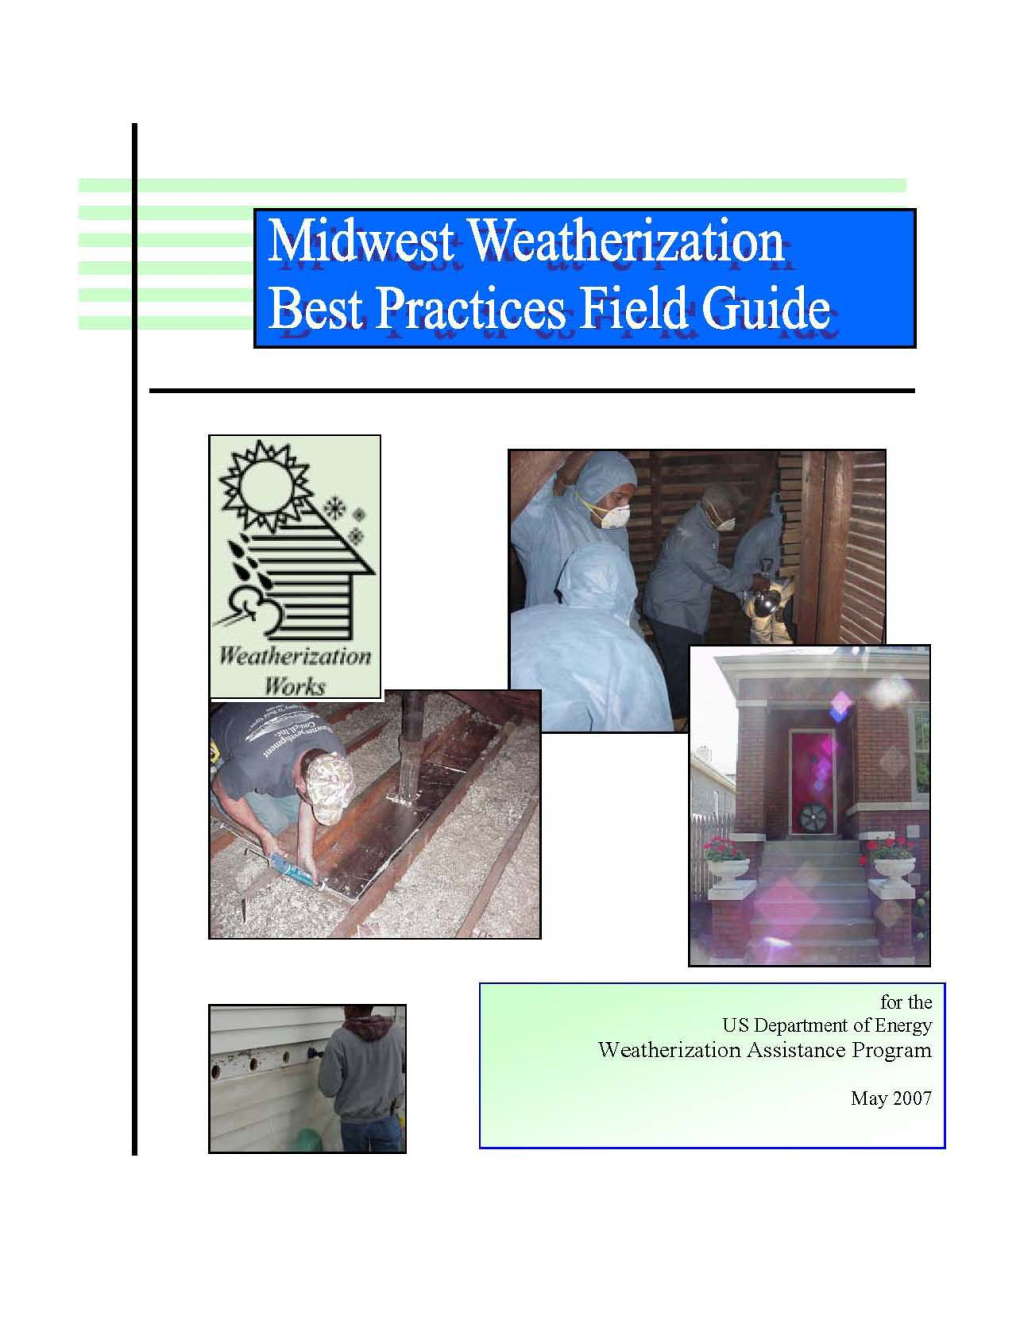 Midwest Weatherization Best Practices Field Guide